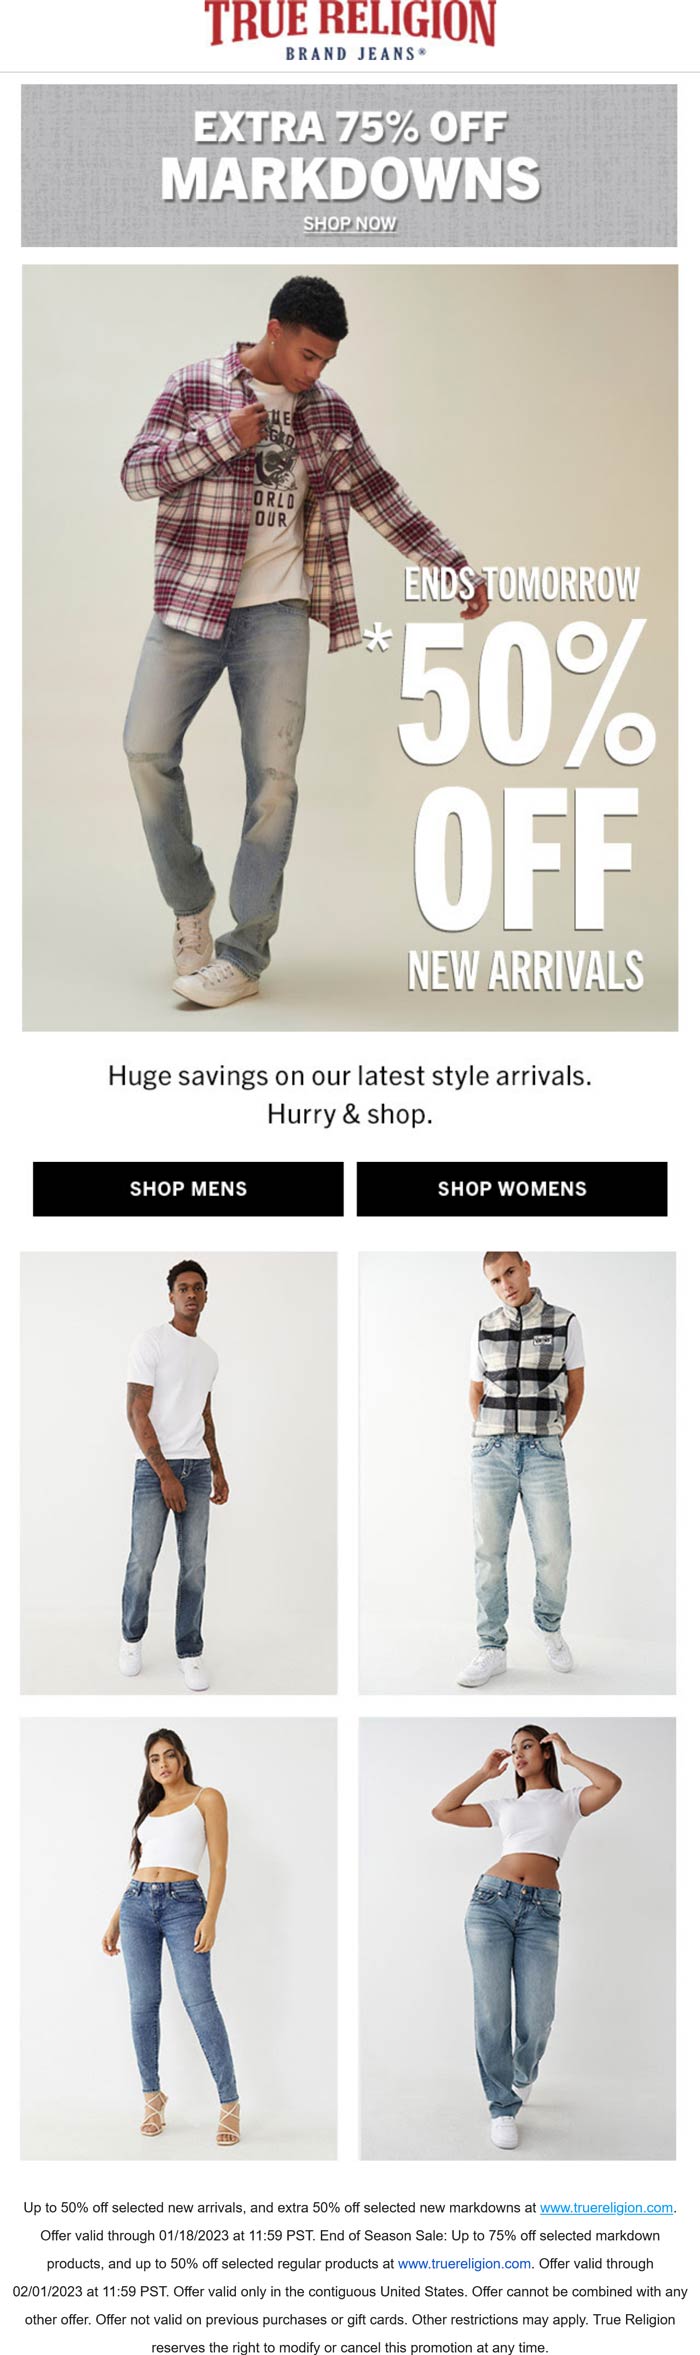 True Religion stores Coupon  50% off new arrivals at True Religion #truereligion 